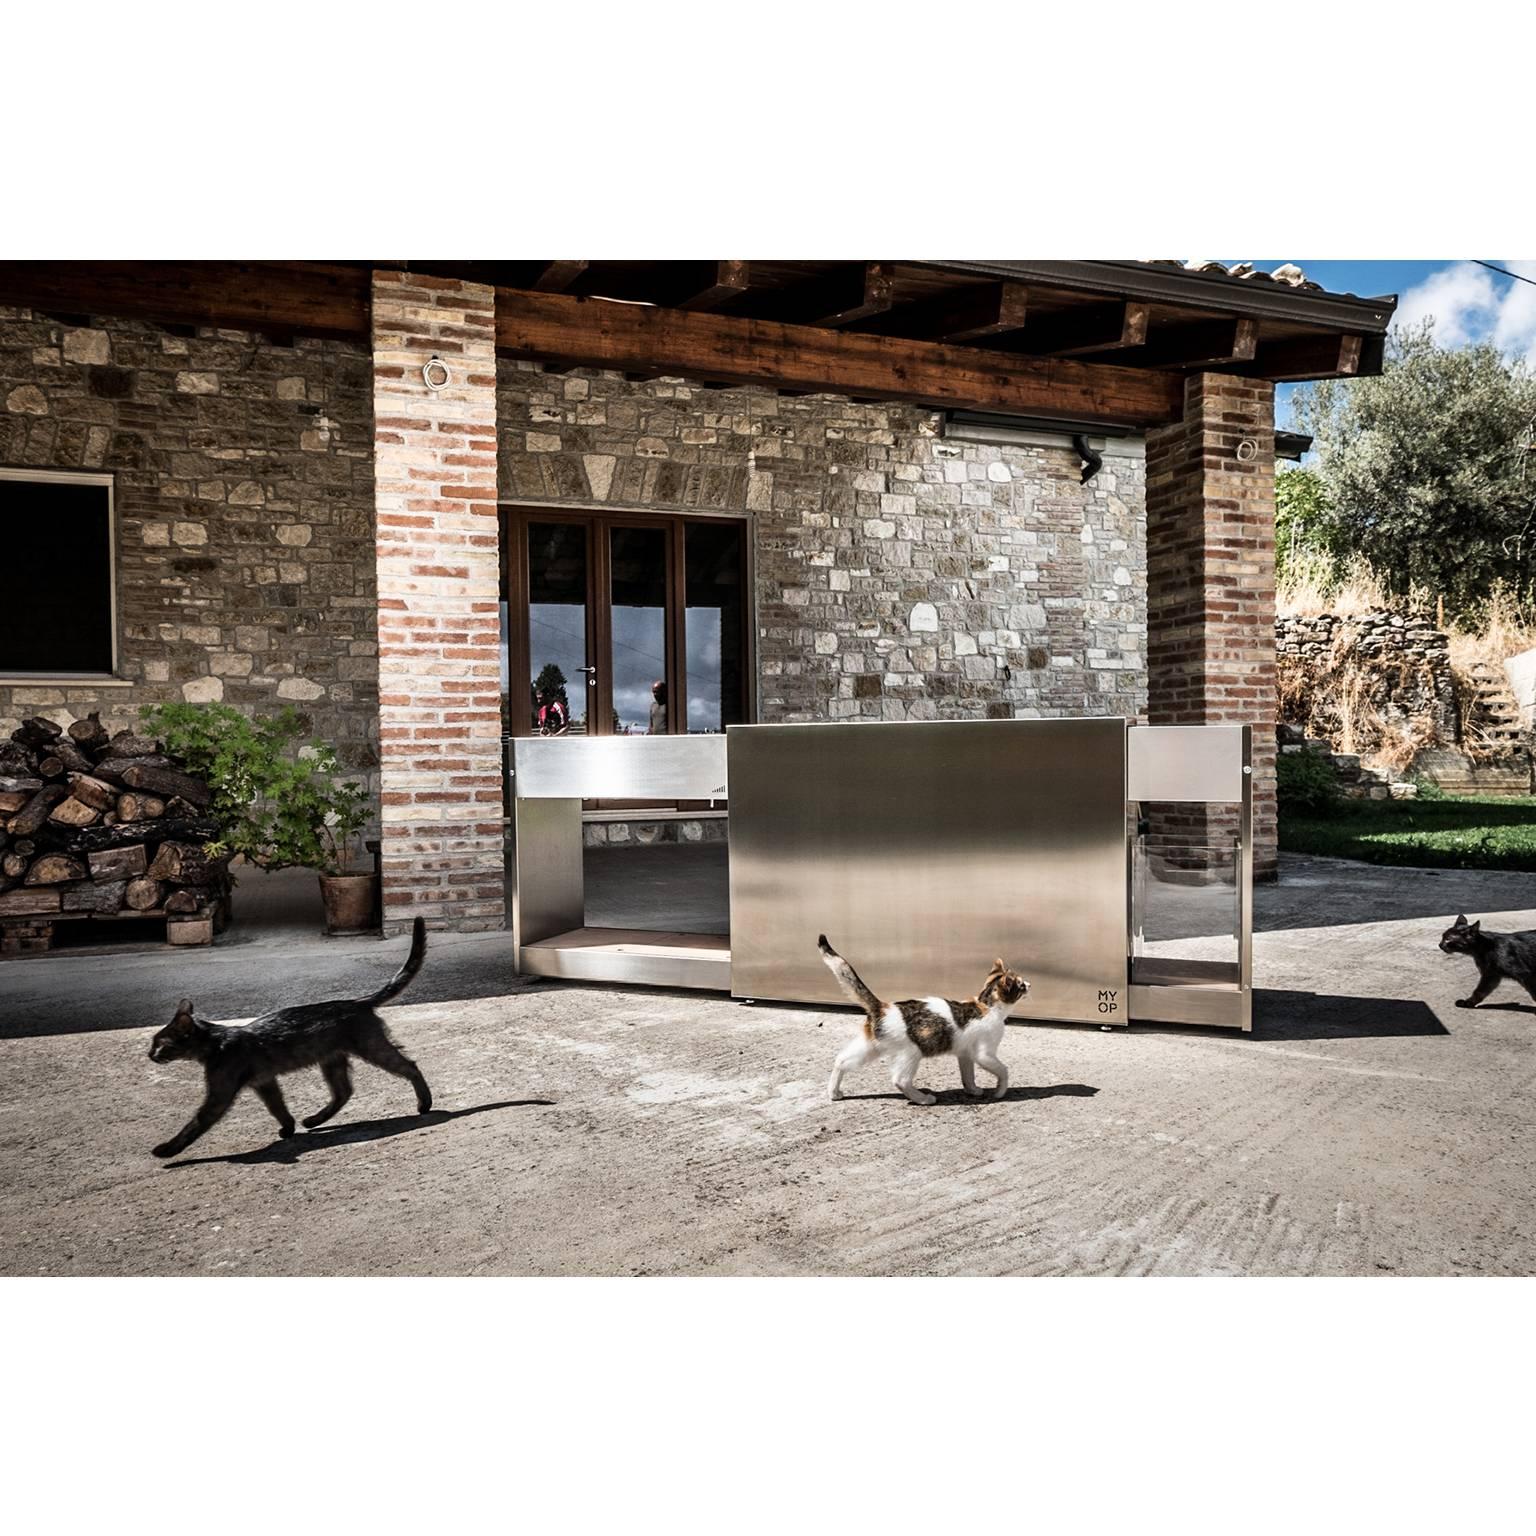 Contemporary Functional Outdoor Stainless Steel Charcoal Barbecue with Sliding Grills, Snail For Sale